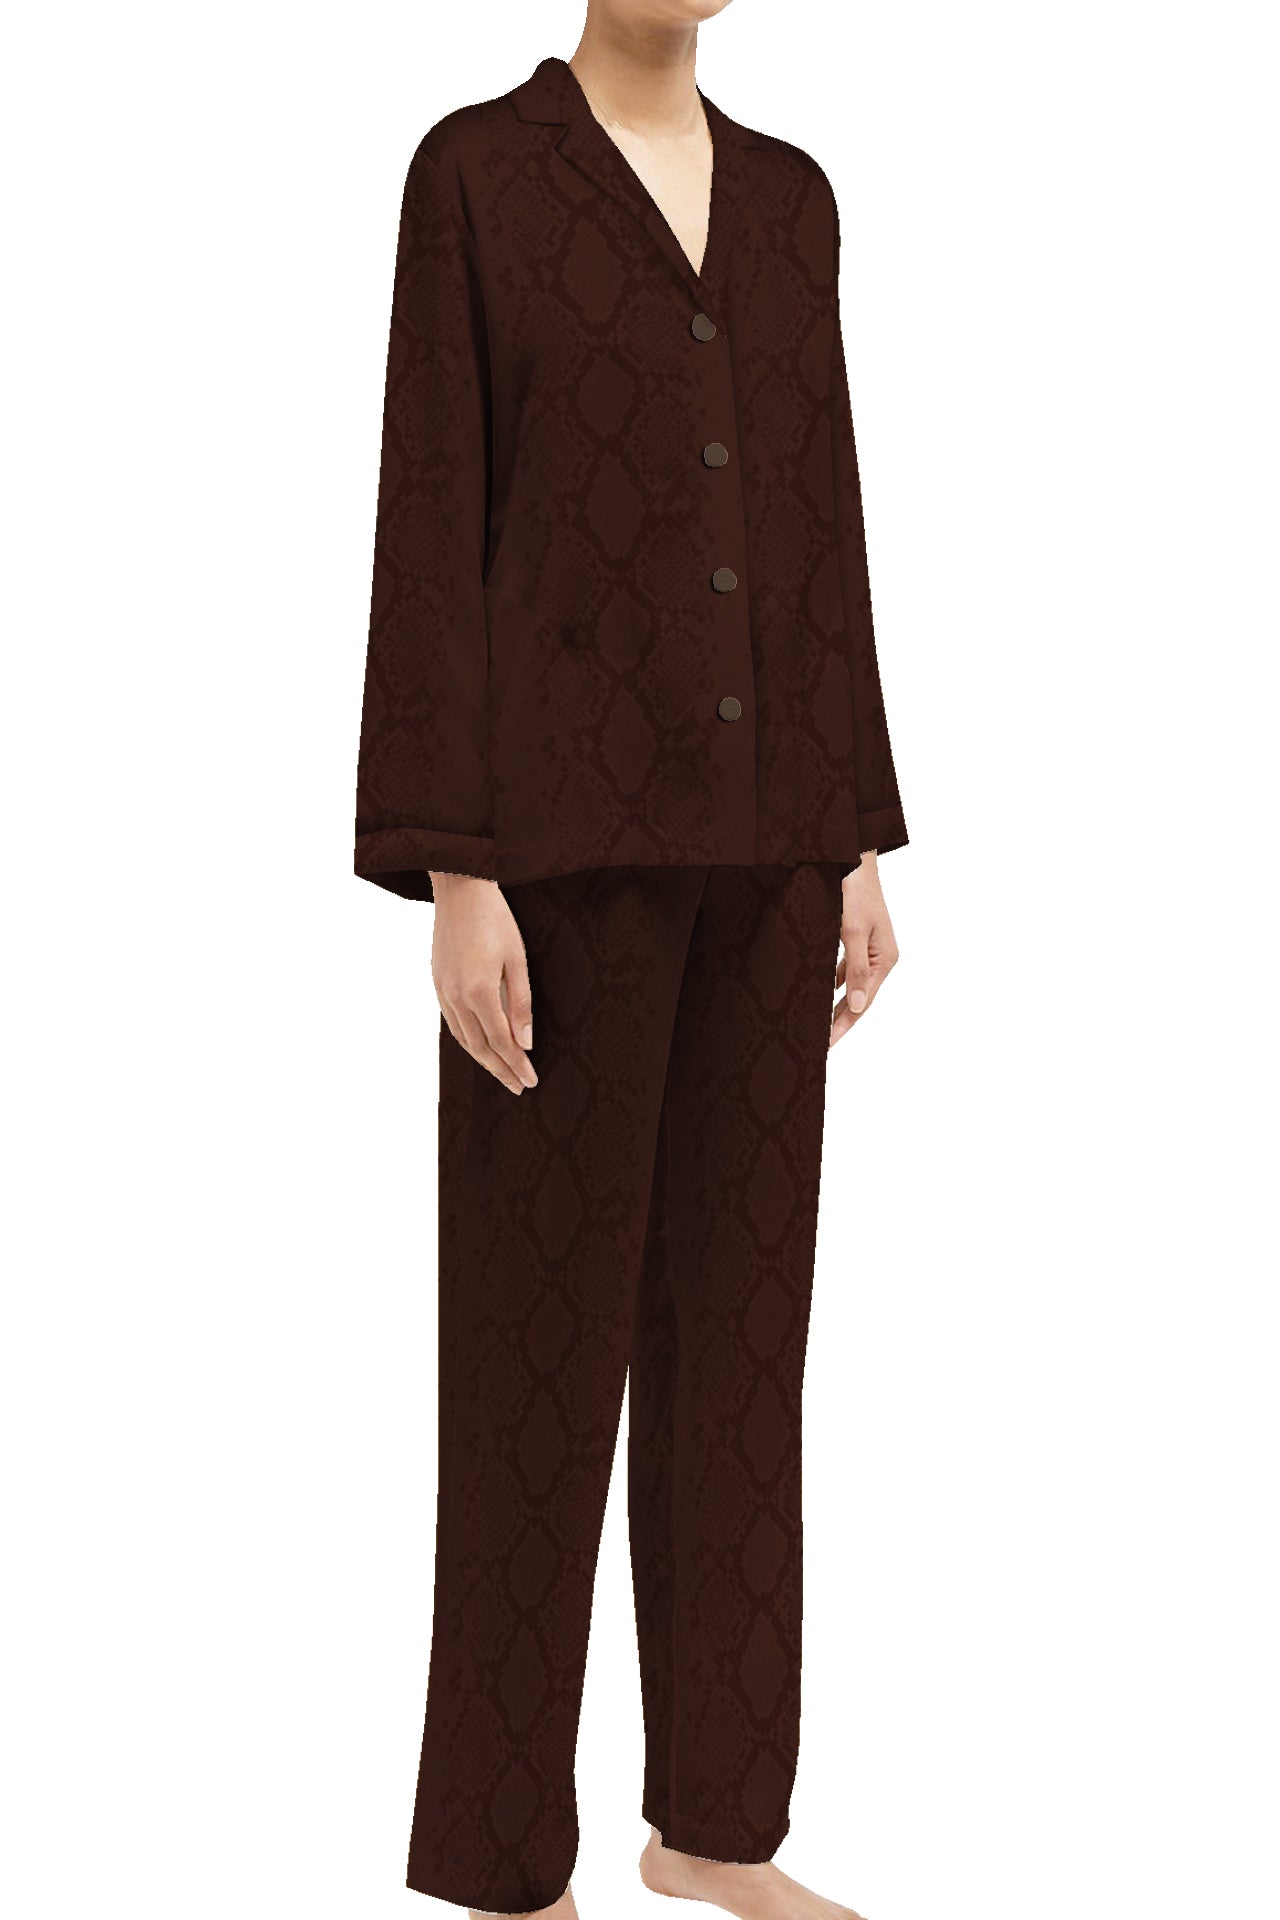 Cupro Silk Jacket and Pant Set for Women